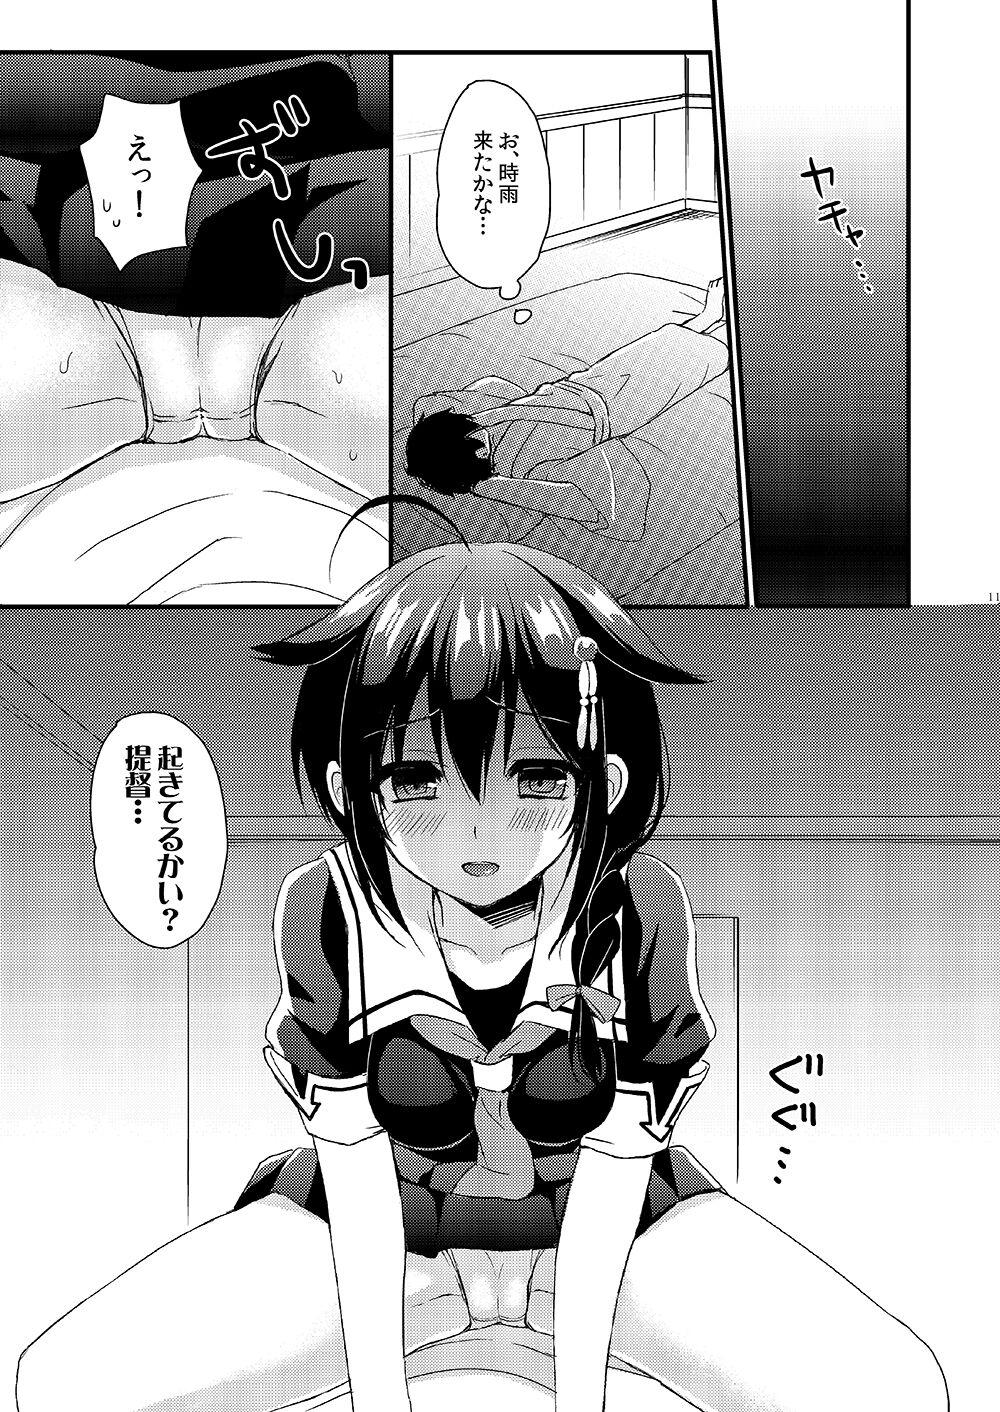 Spying Shigure Yandere - Kantai collection Arabe - Page 9